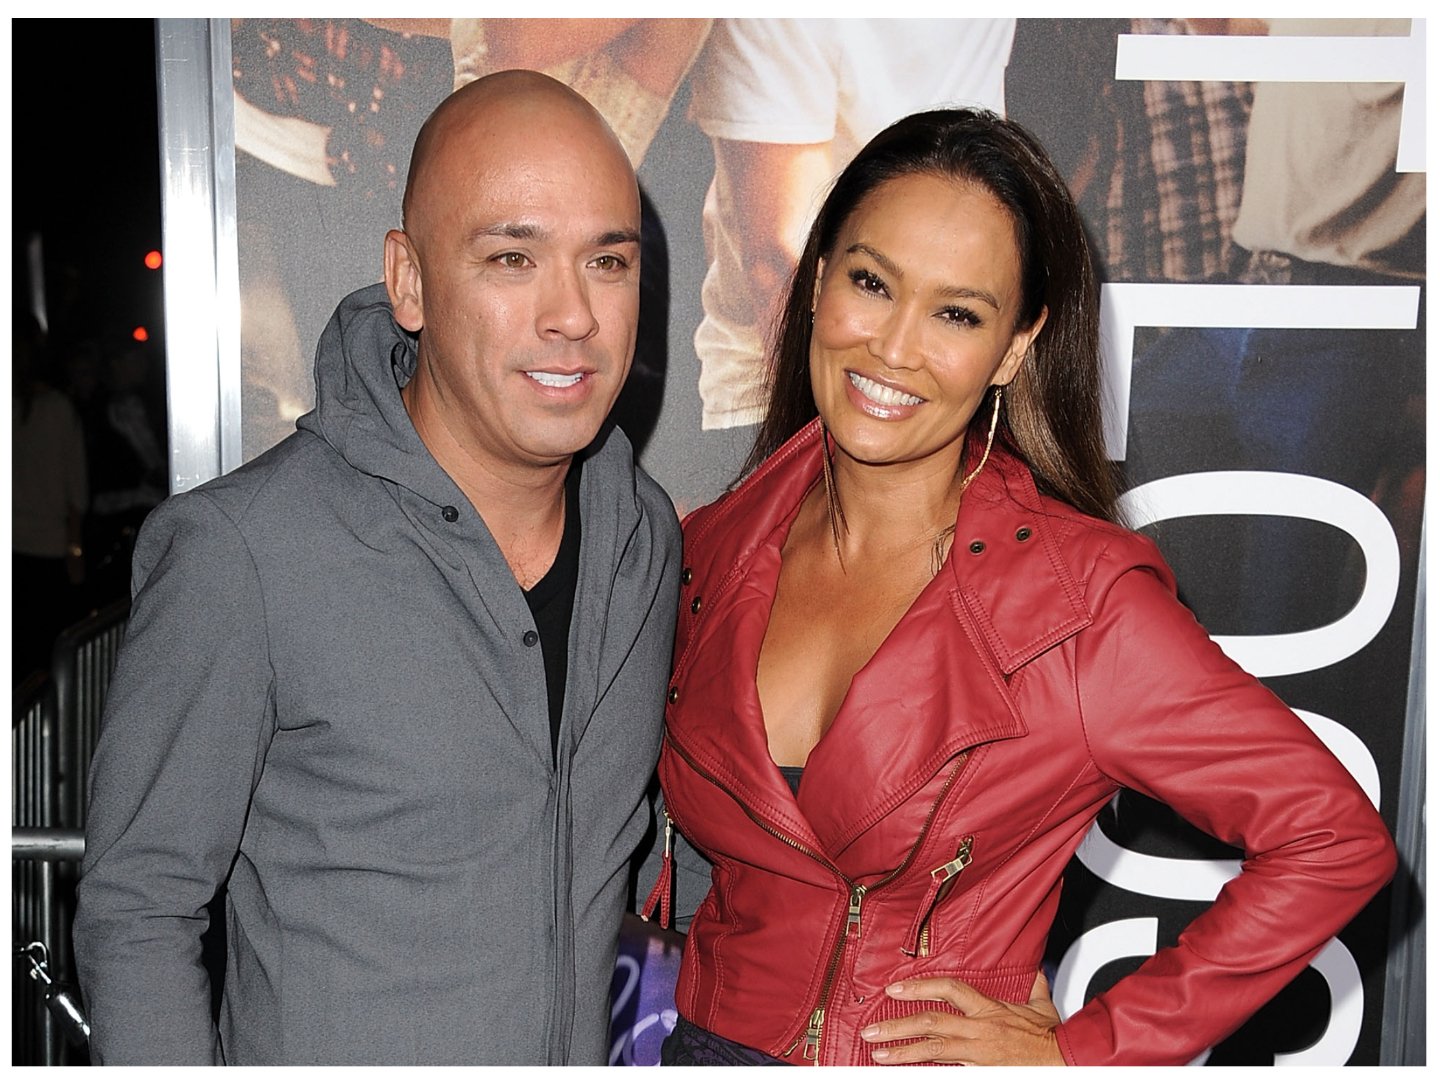 Tia Carrere and Jo Koy from 'Easter Sunday' attended a premiere together in 2011